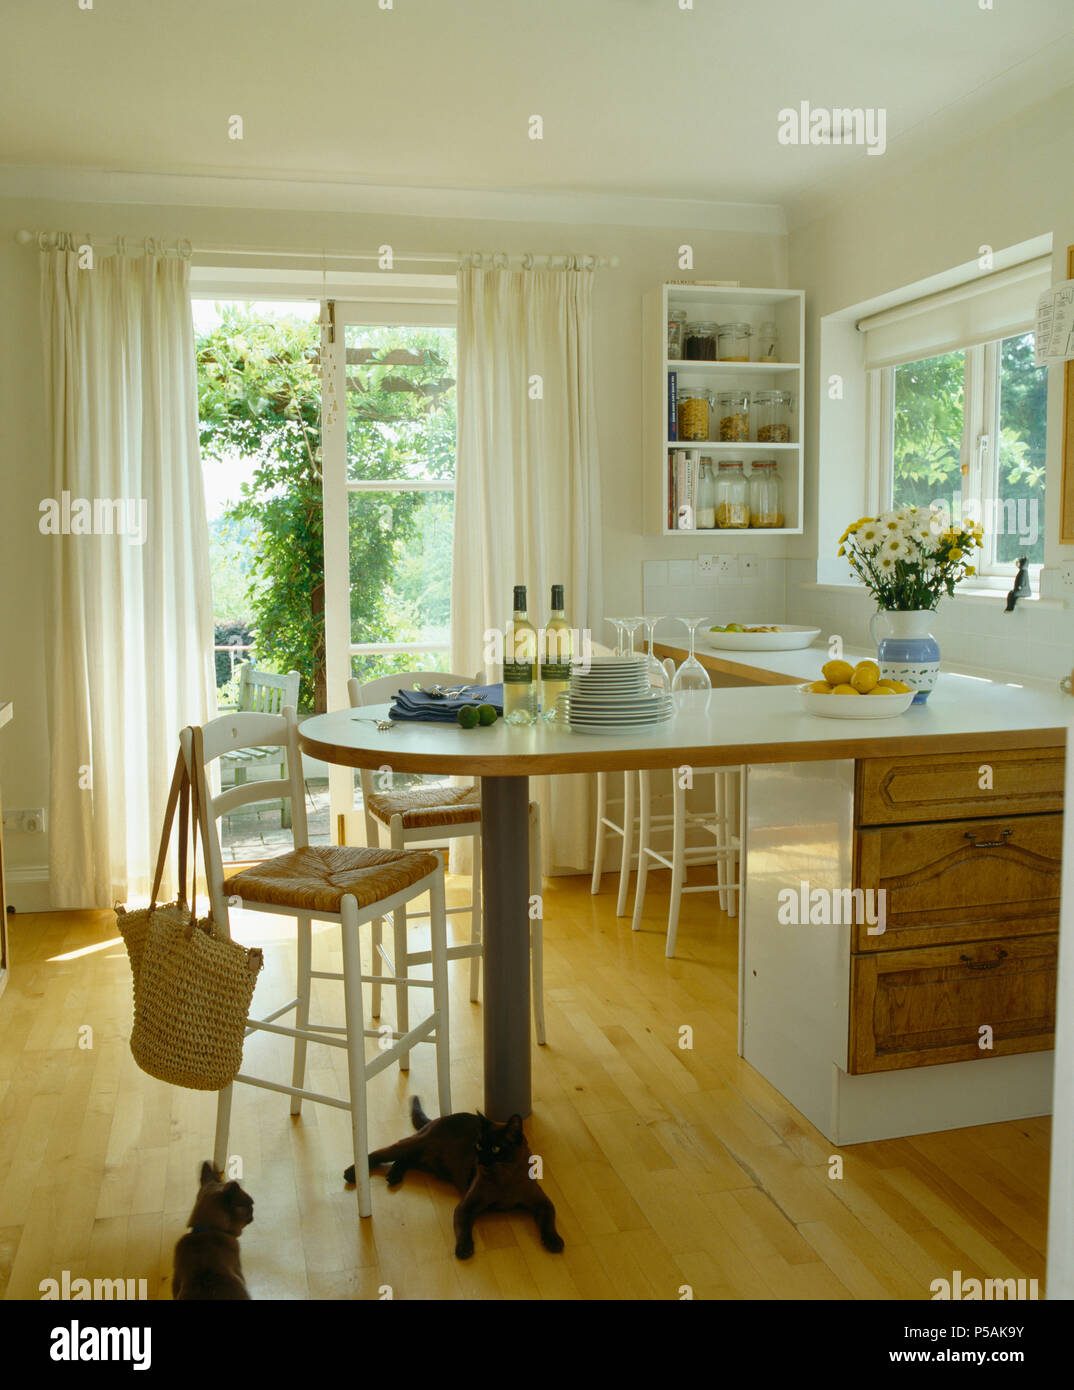 Rush-seated stool at breakfast bar in white country kitchen with French windows and wooden flooring Stock Photo